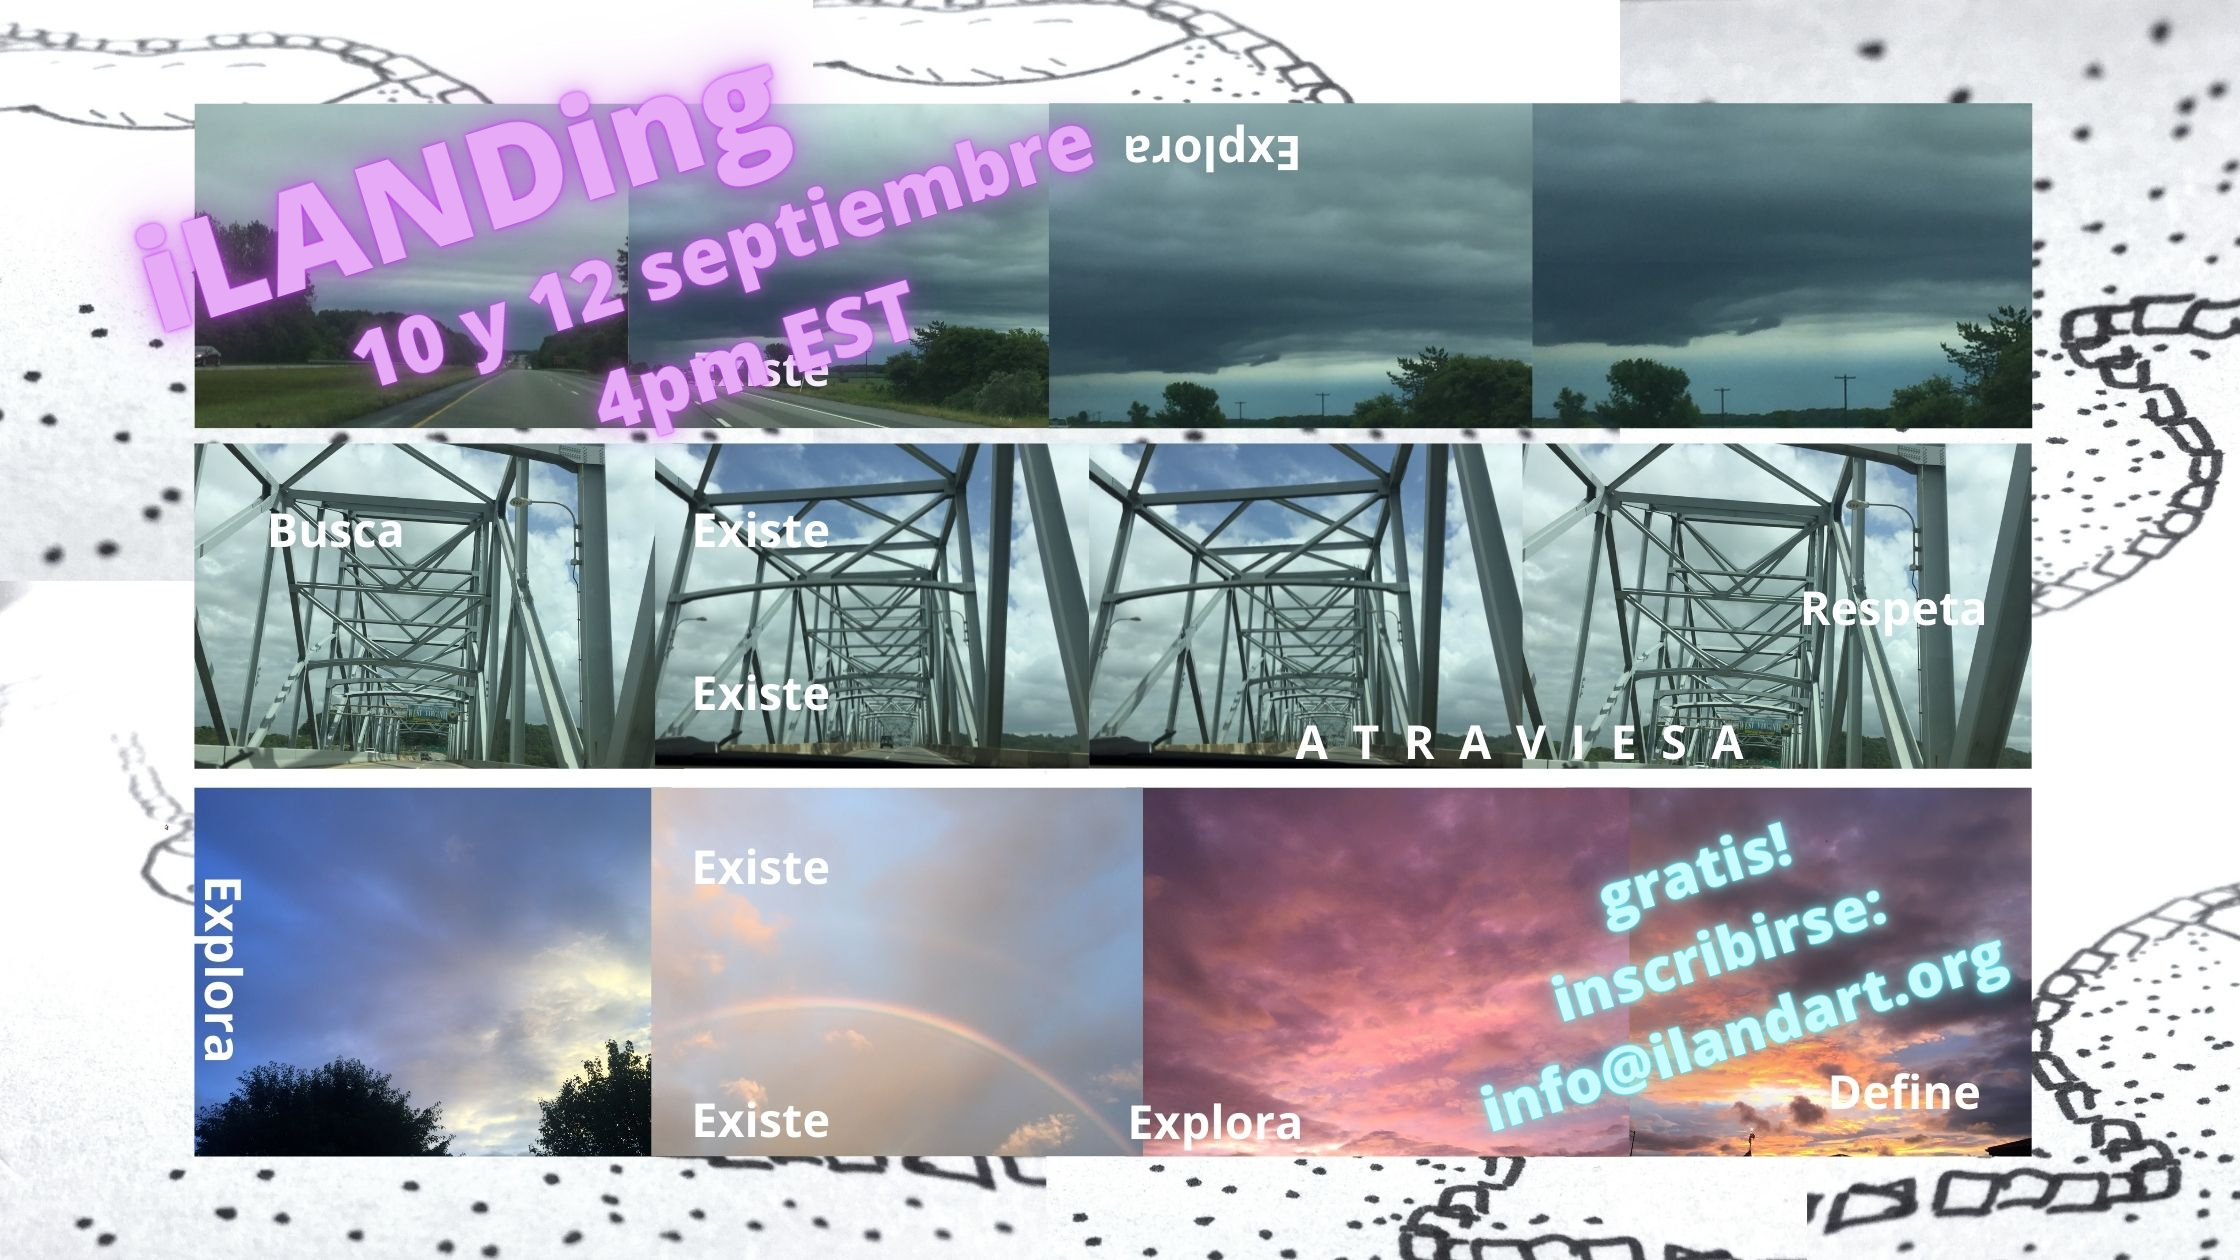 Image courtesy Catalina Hernández: featuring three rows of skylines atop a background of dotted sketching. Overlaid on the images in various orientations are the words “Existe,” “Explora,” “ATRAVIESA,” “Define,” Respeta,” and “Busca” in small white font. In top left of image in glowing pink font in top left: “iLANDing 10 y 12 septiembre 4pm EST.” In bottom right of image in glowing green: “¡gratis! Inscribirse: info@ilandart.org”